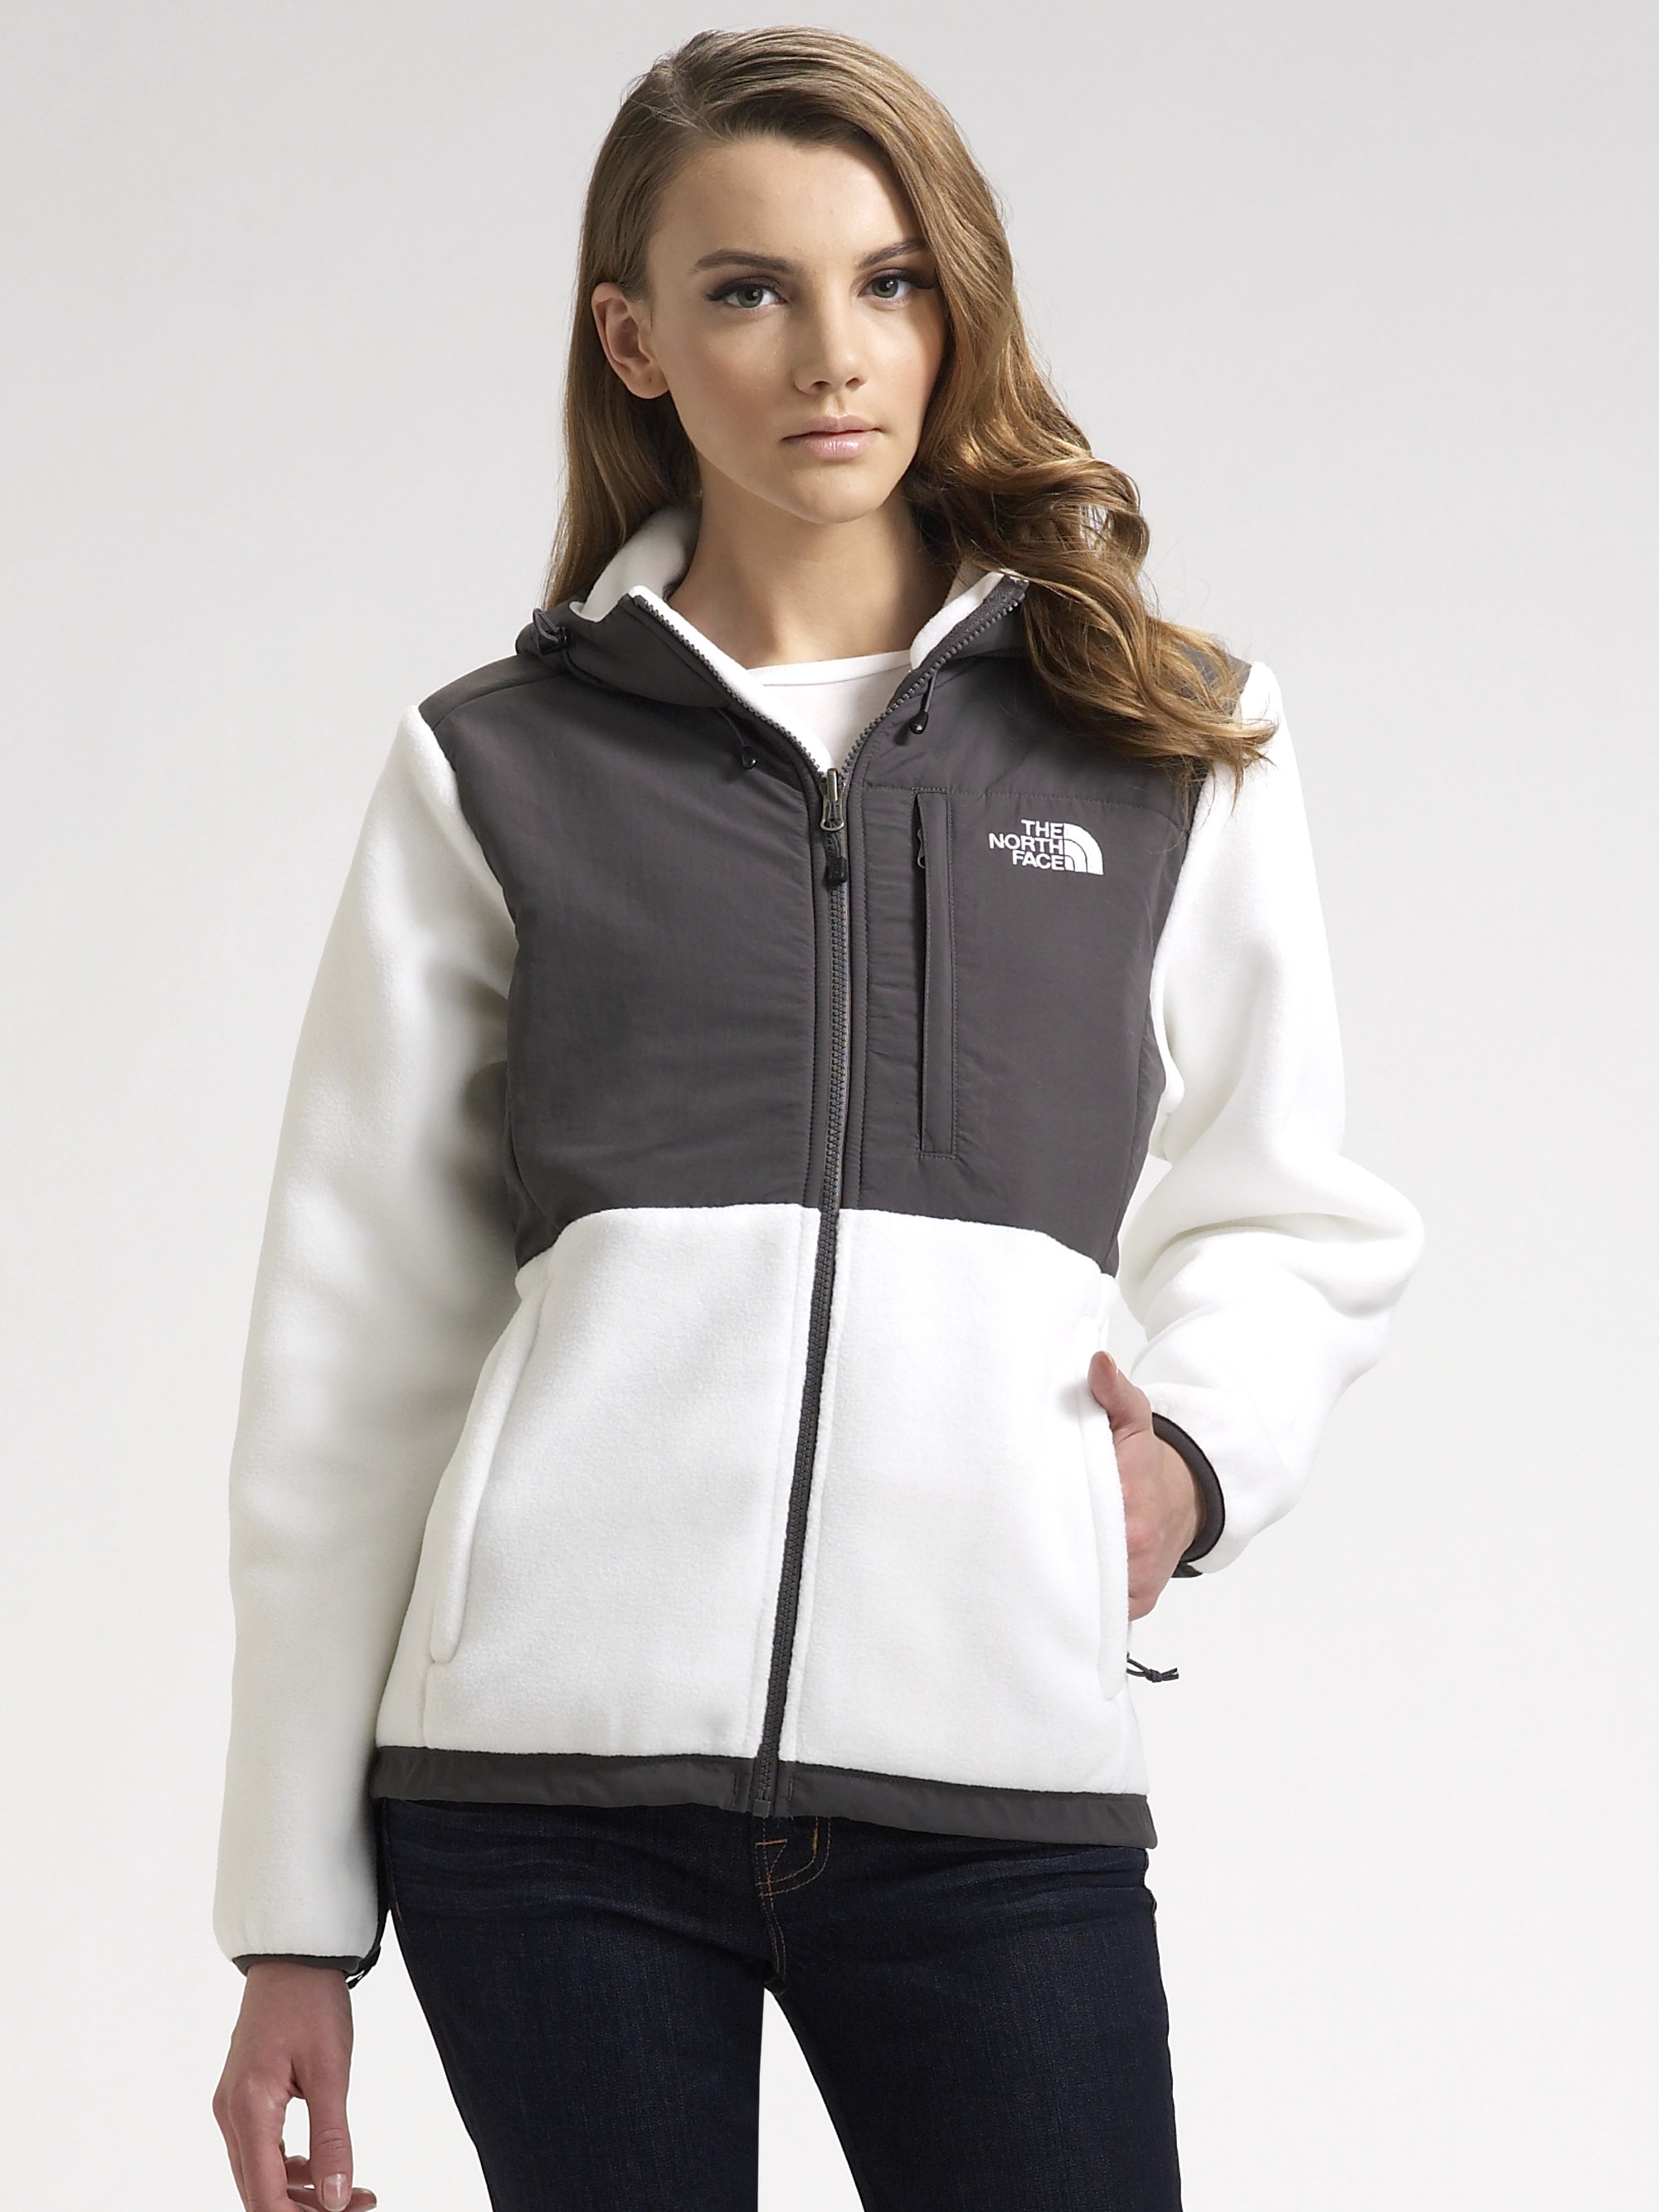 white and grey north face fleece